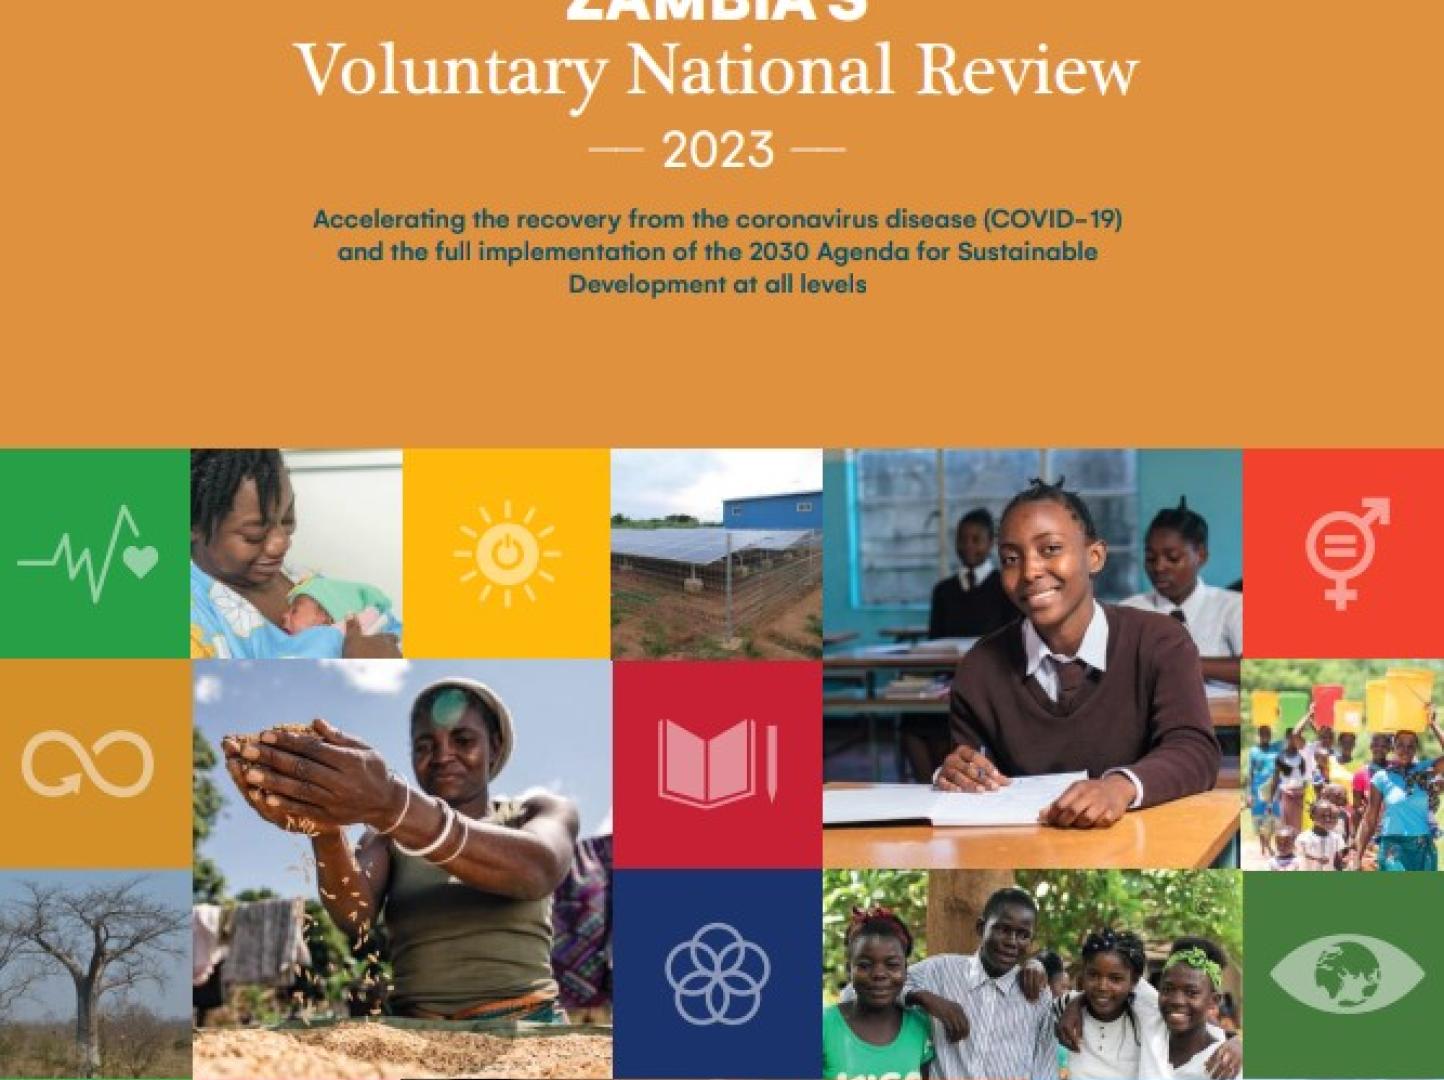 Zambia's Voluntary National Review - 2023 